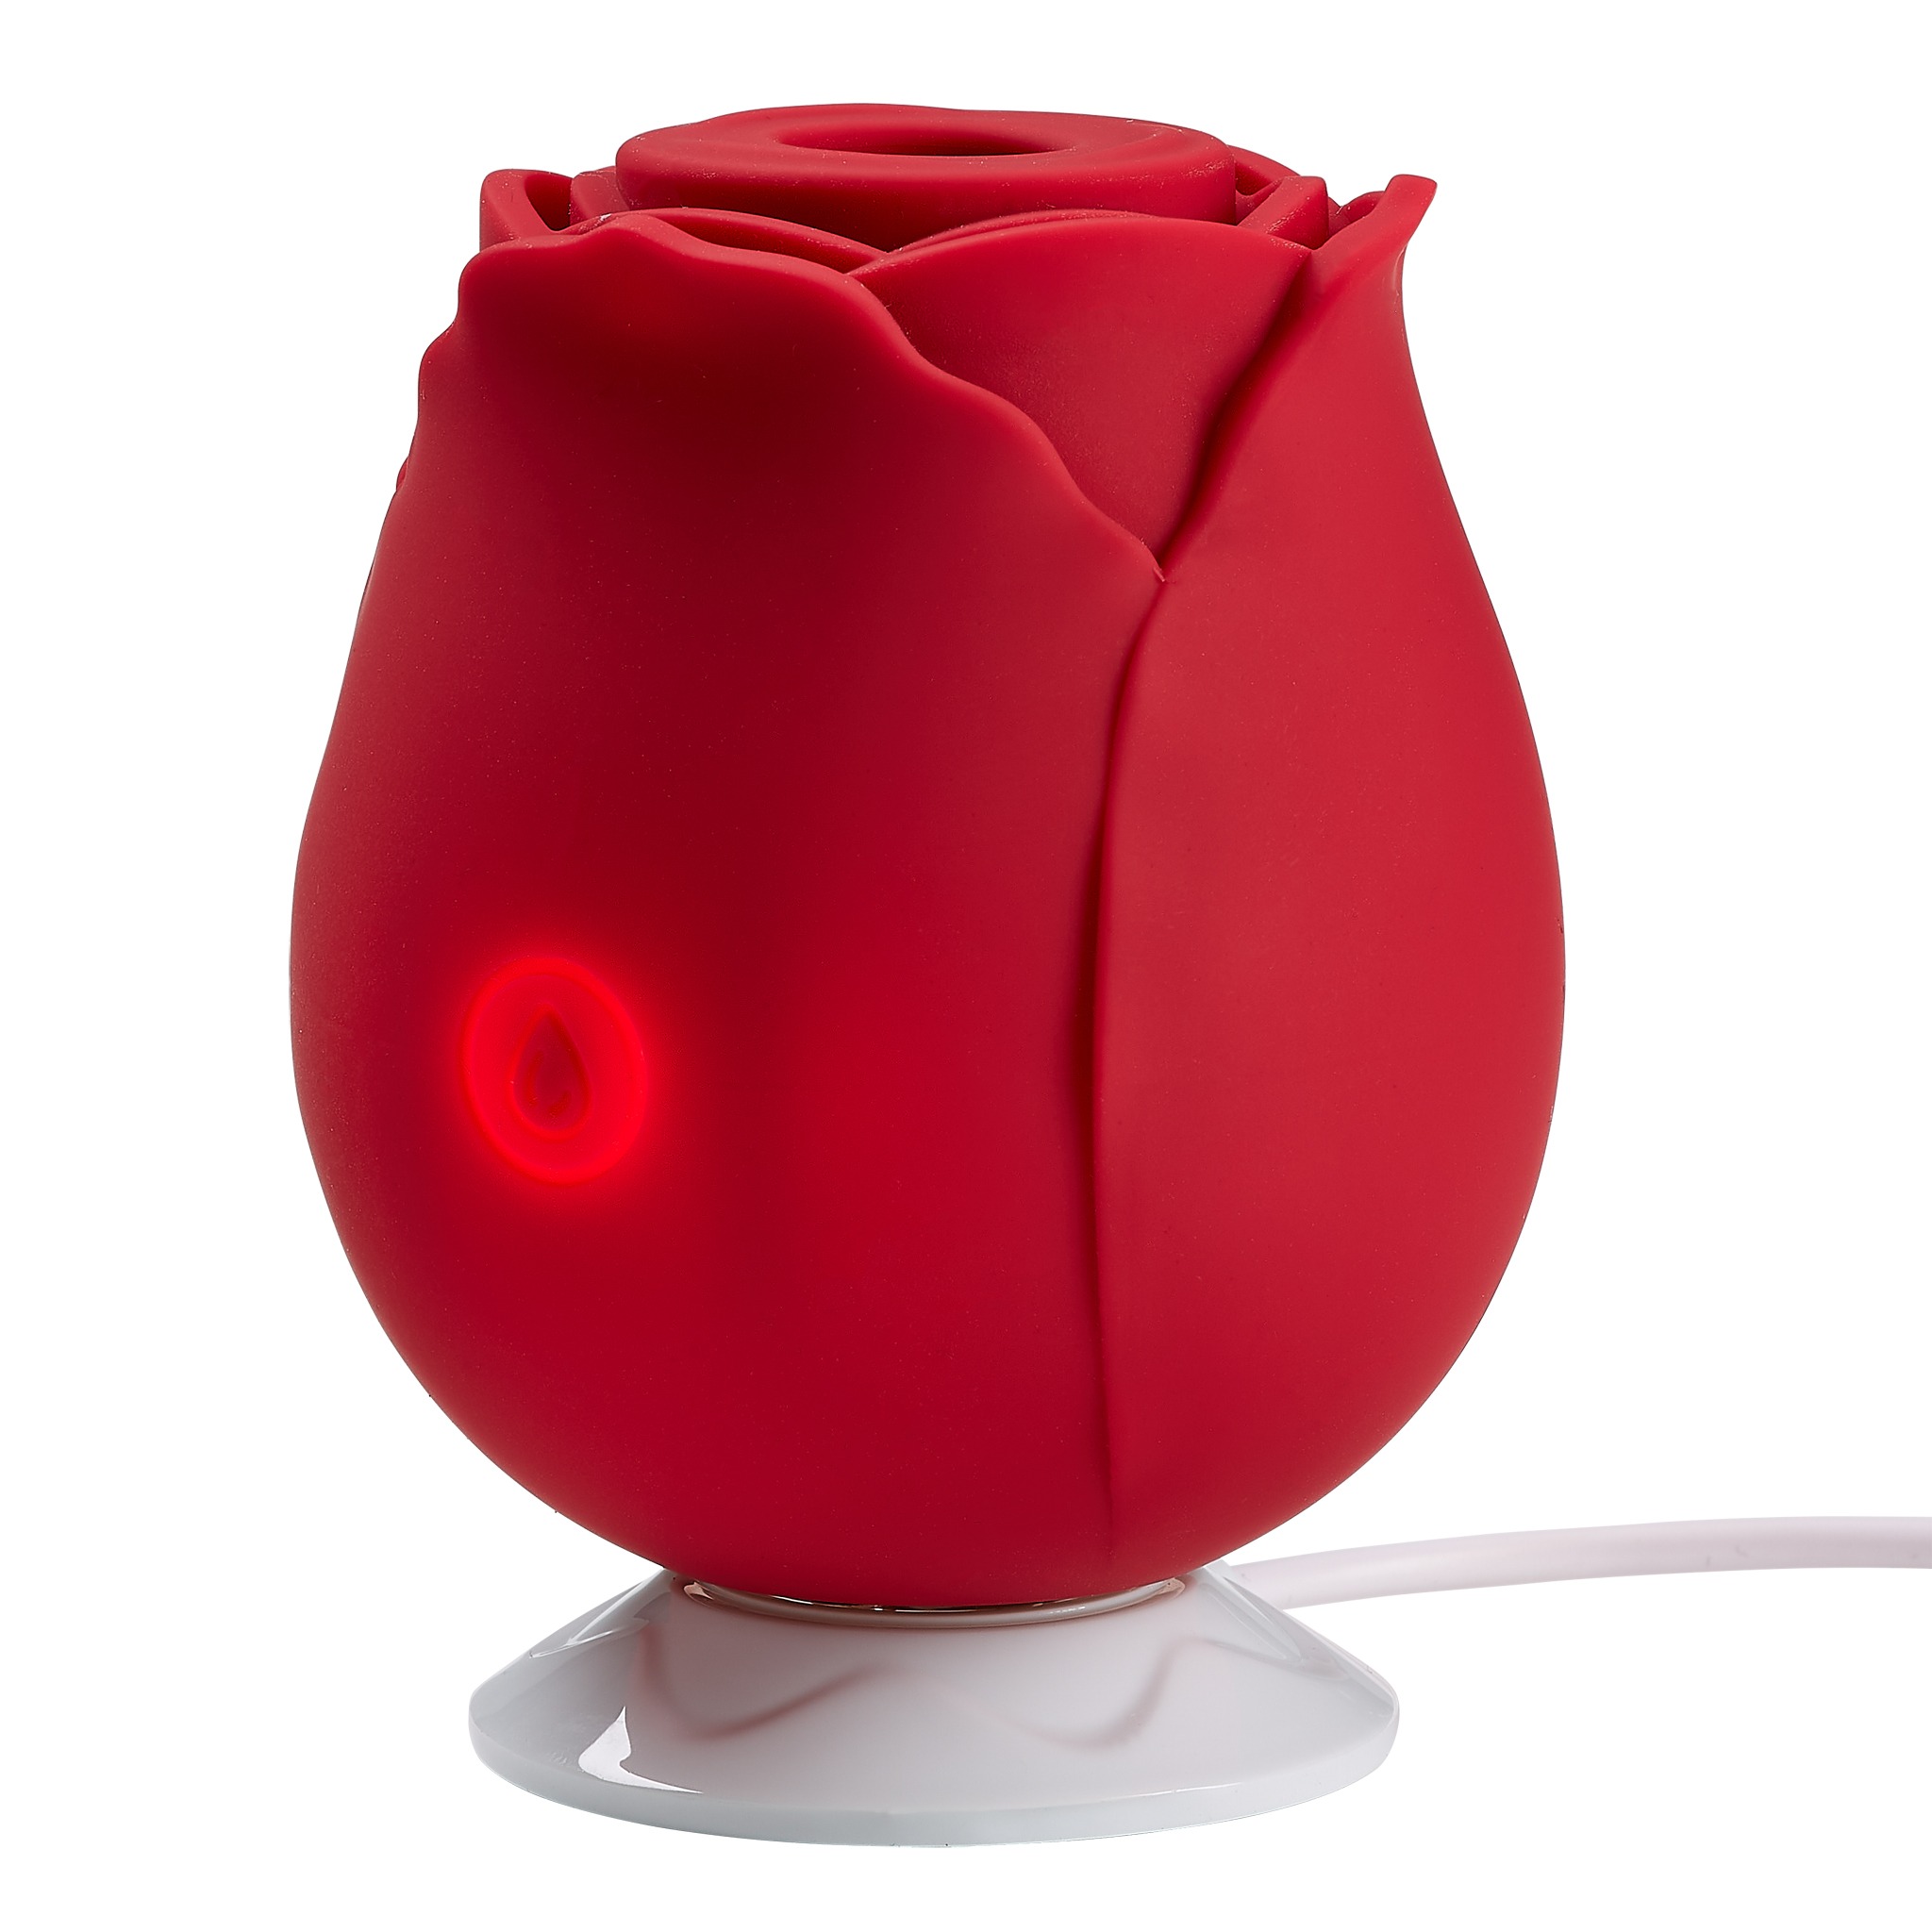 Cloud 9 Health and Wellness Rose Suction Stimulator Red. 184